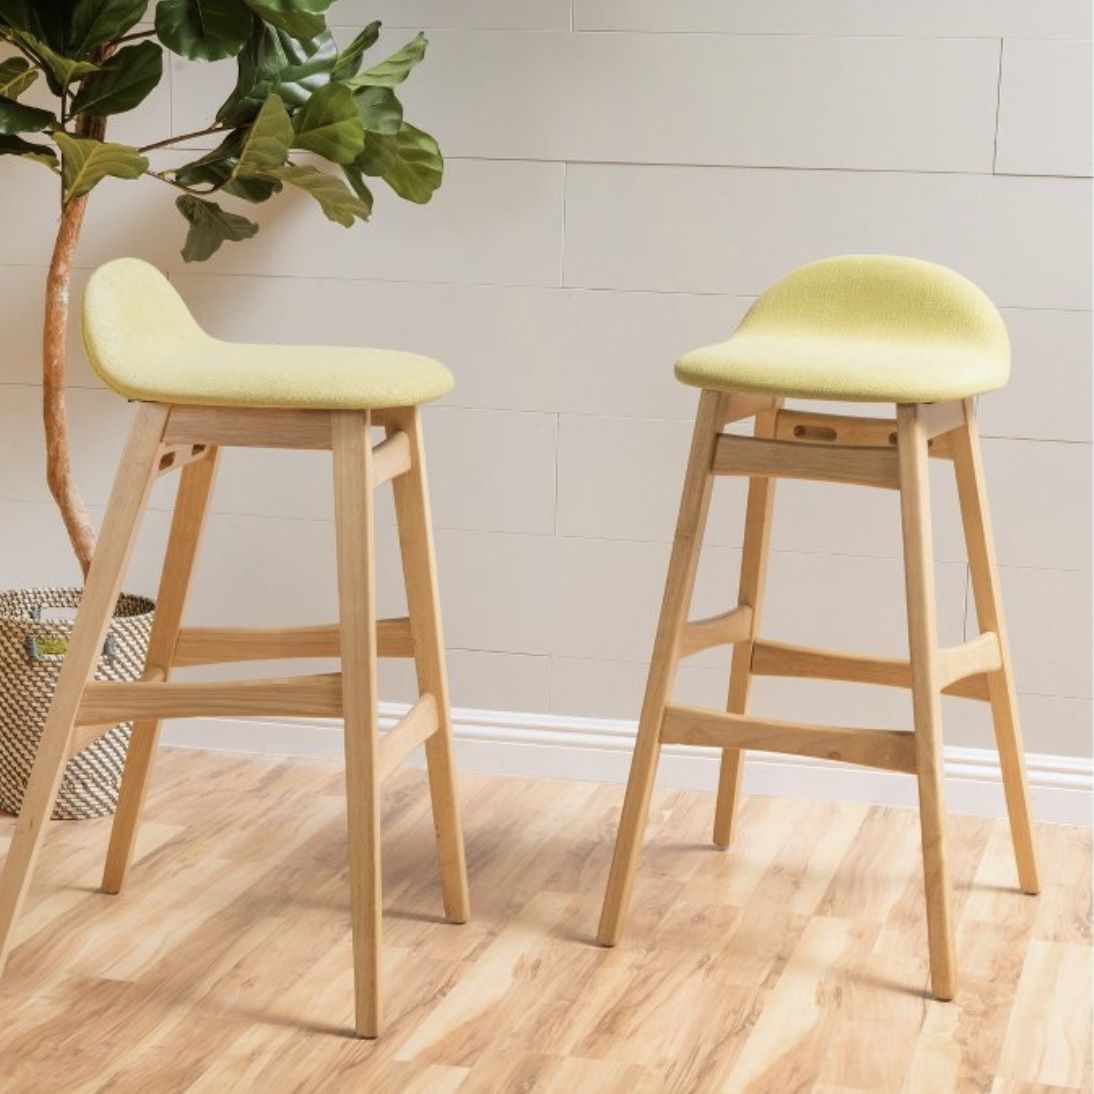 Wooden Bar Stools (Moria by Christopher Knight)